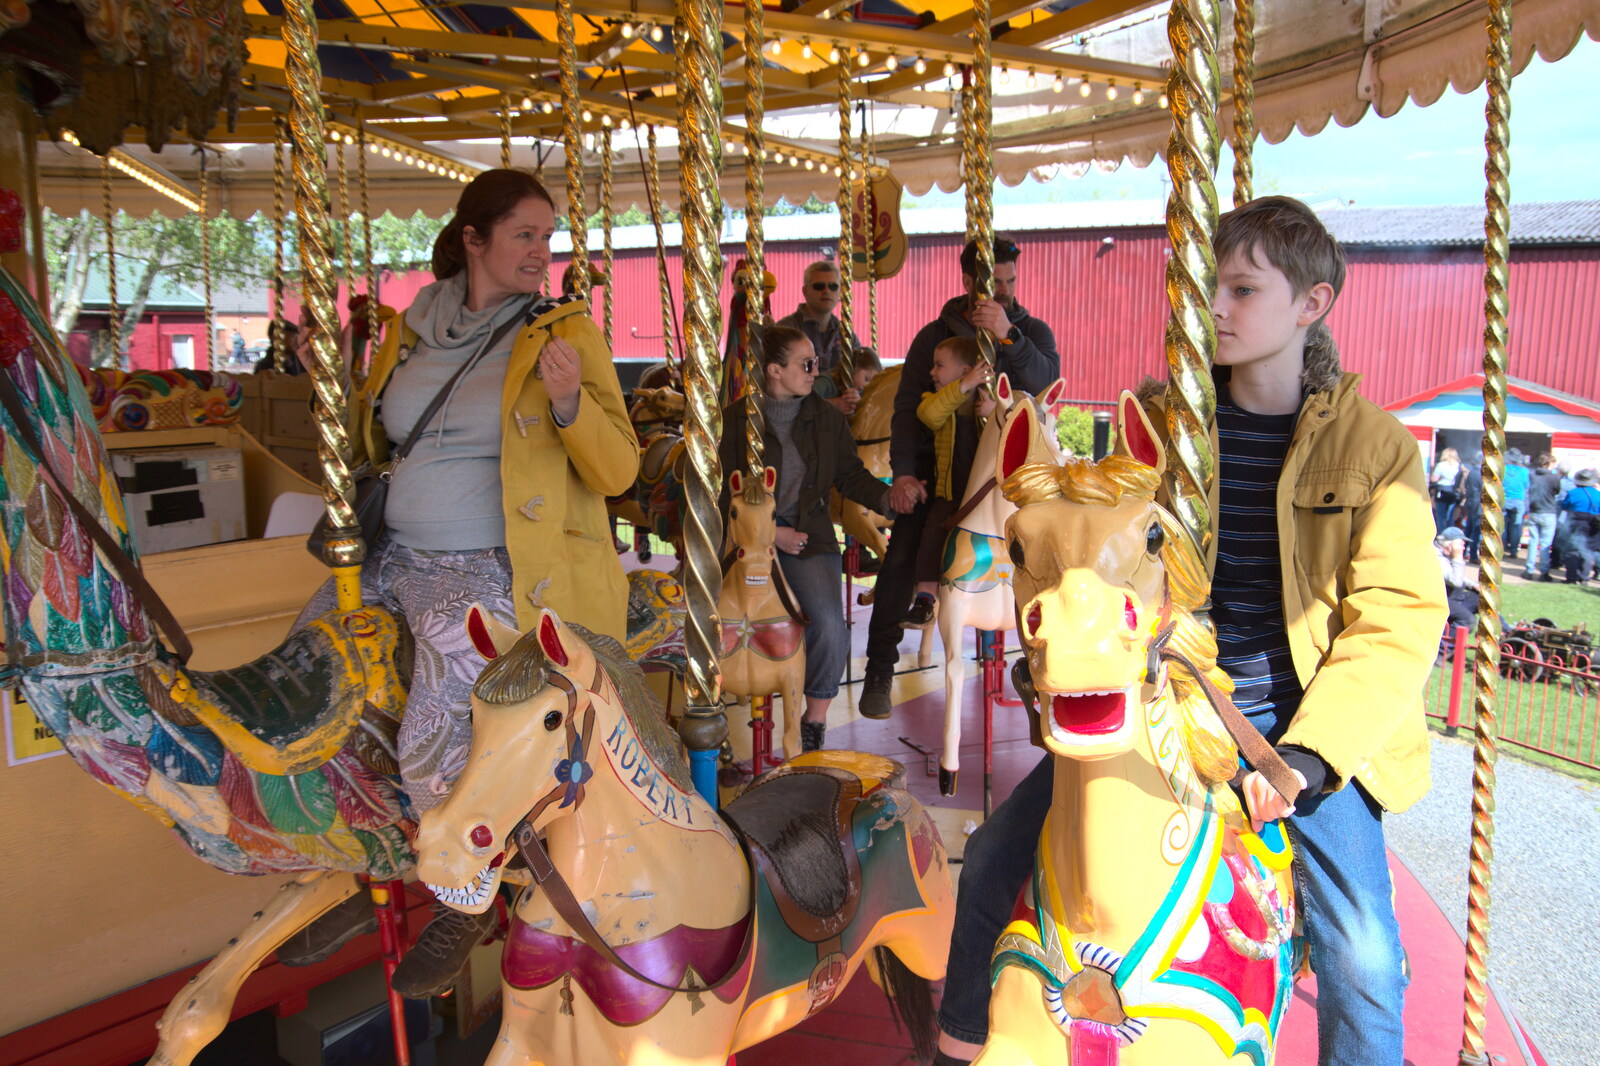 We have a go on the Victorian gallopers from The Heritage Steam Gala, Bressingham Steam Museum, Norfolk - 1st May 2023